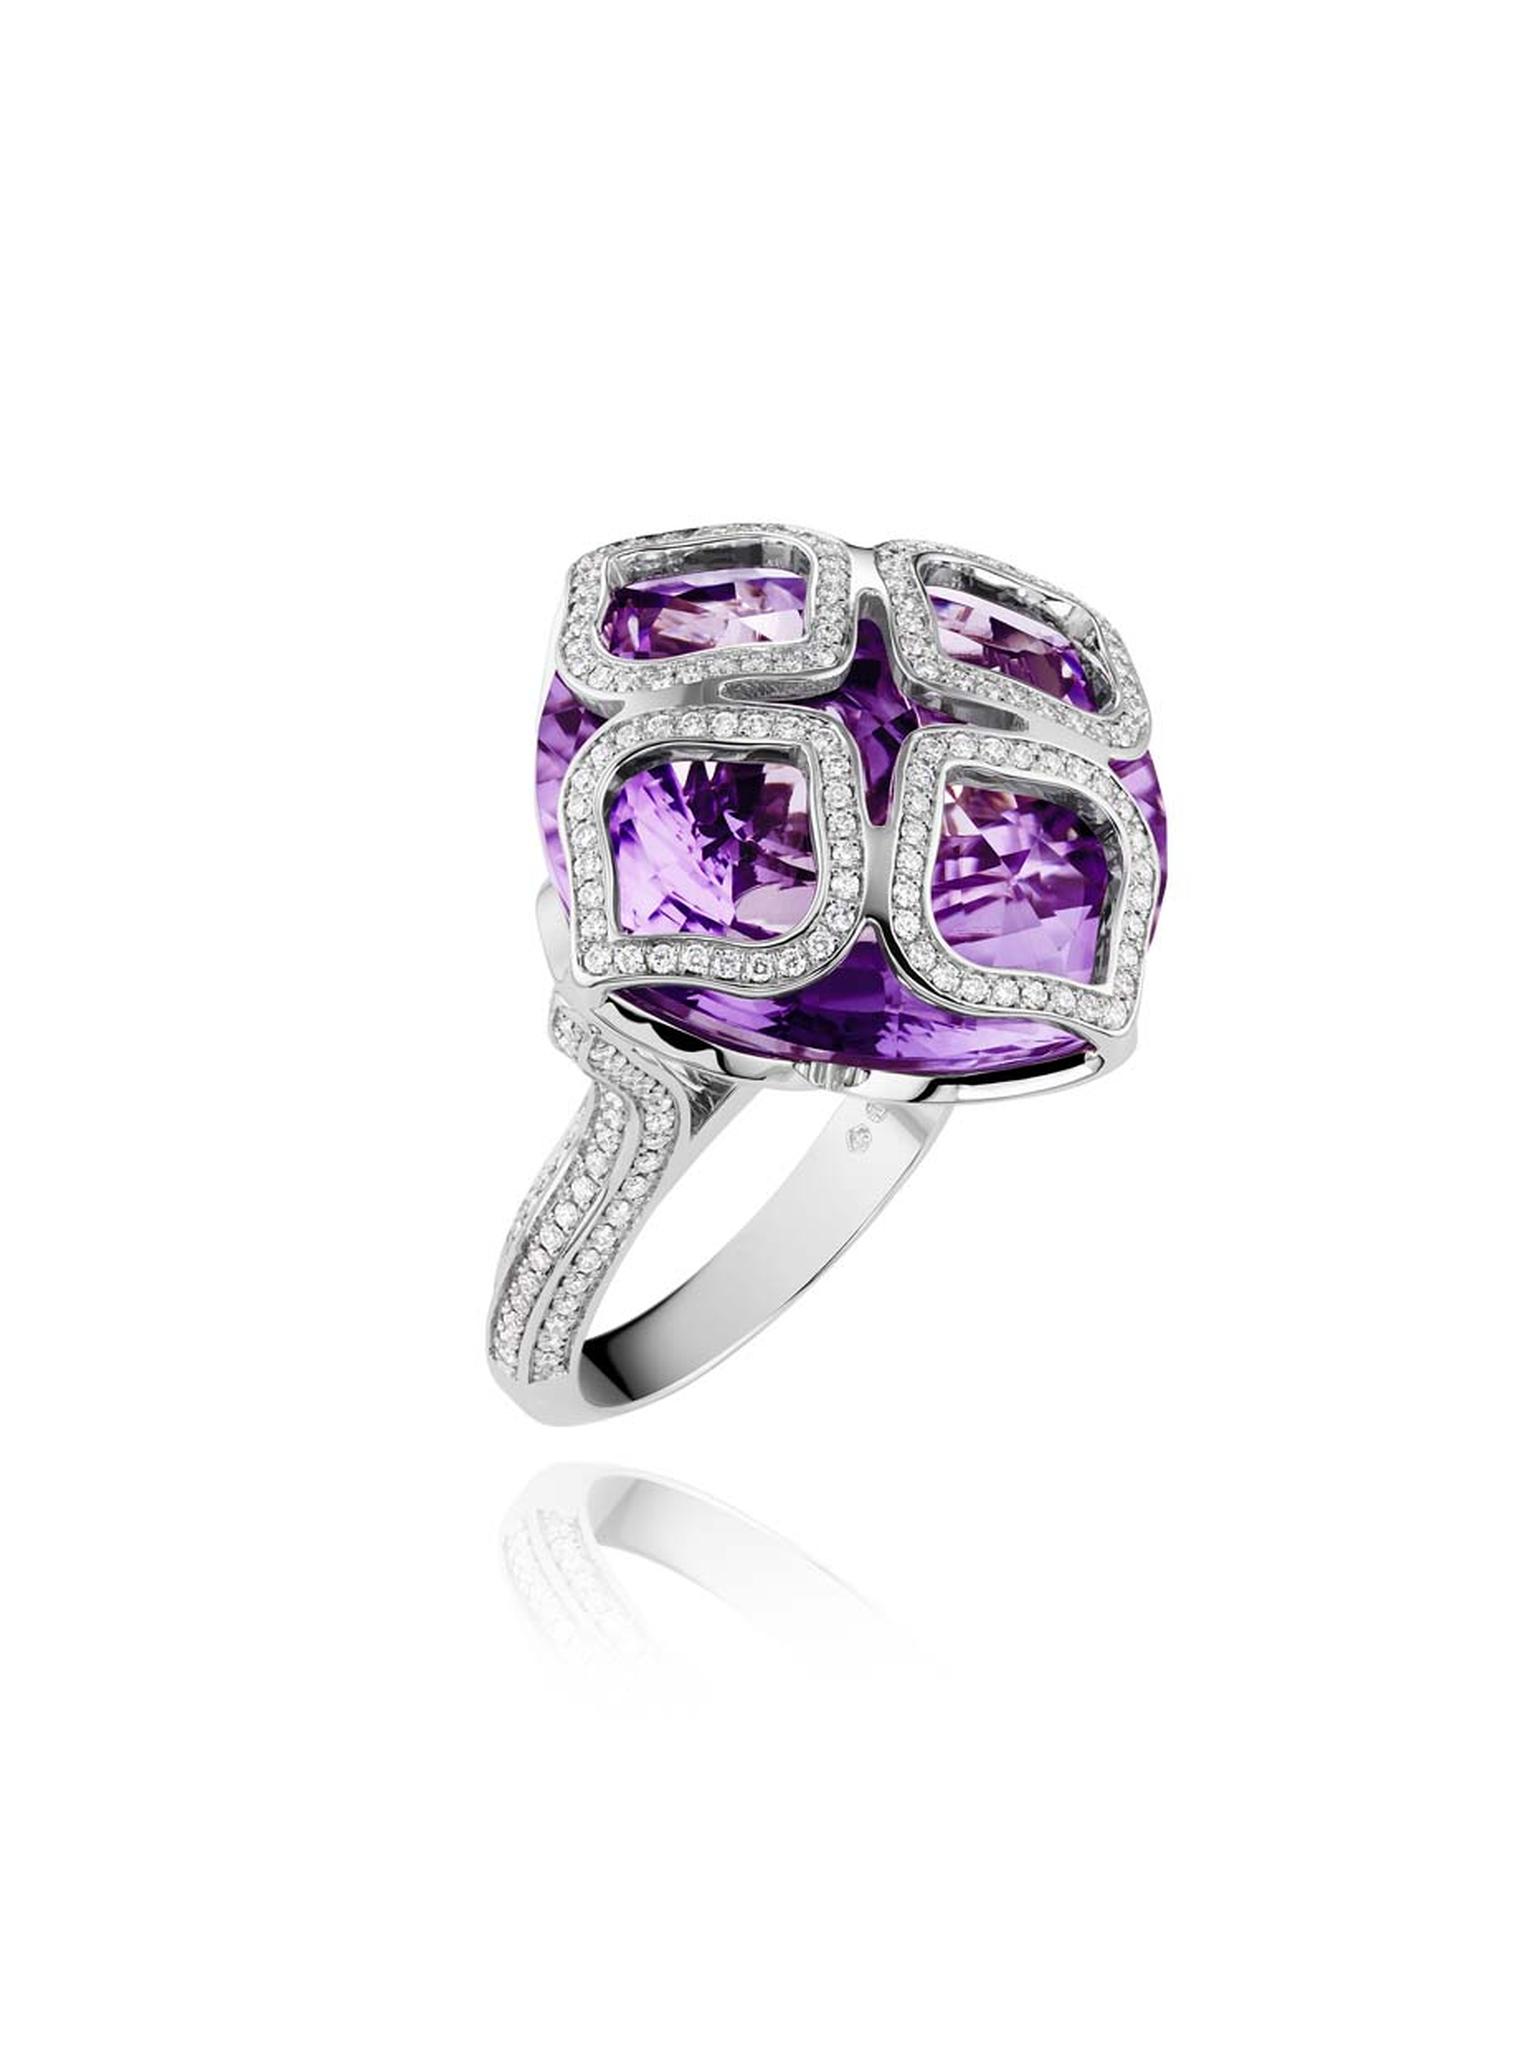 Chopard Imperiale ring featuring a faceted amethyst covered by four diamond-encrusted arabesque motifs.